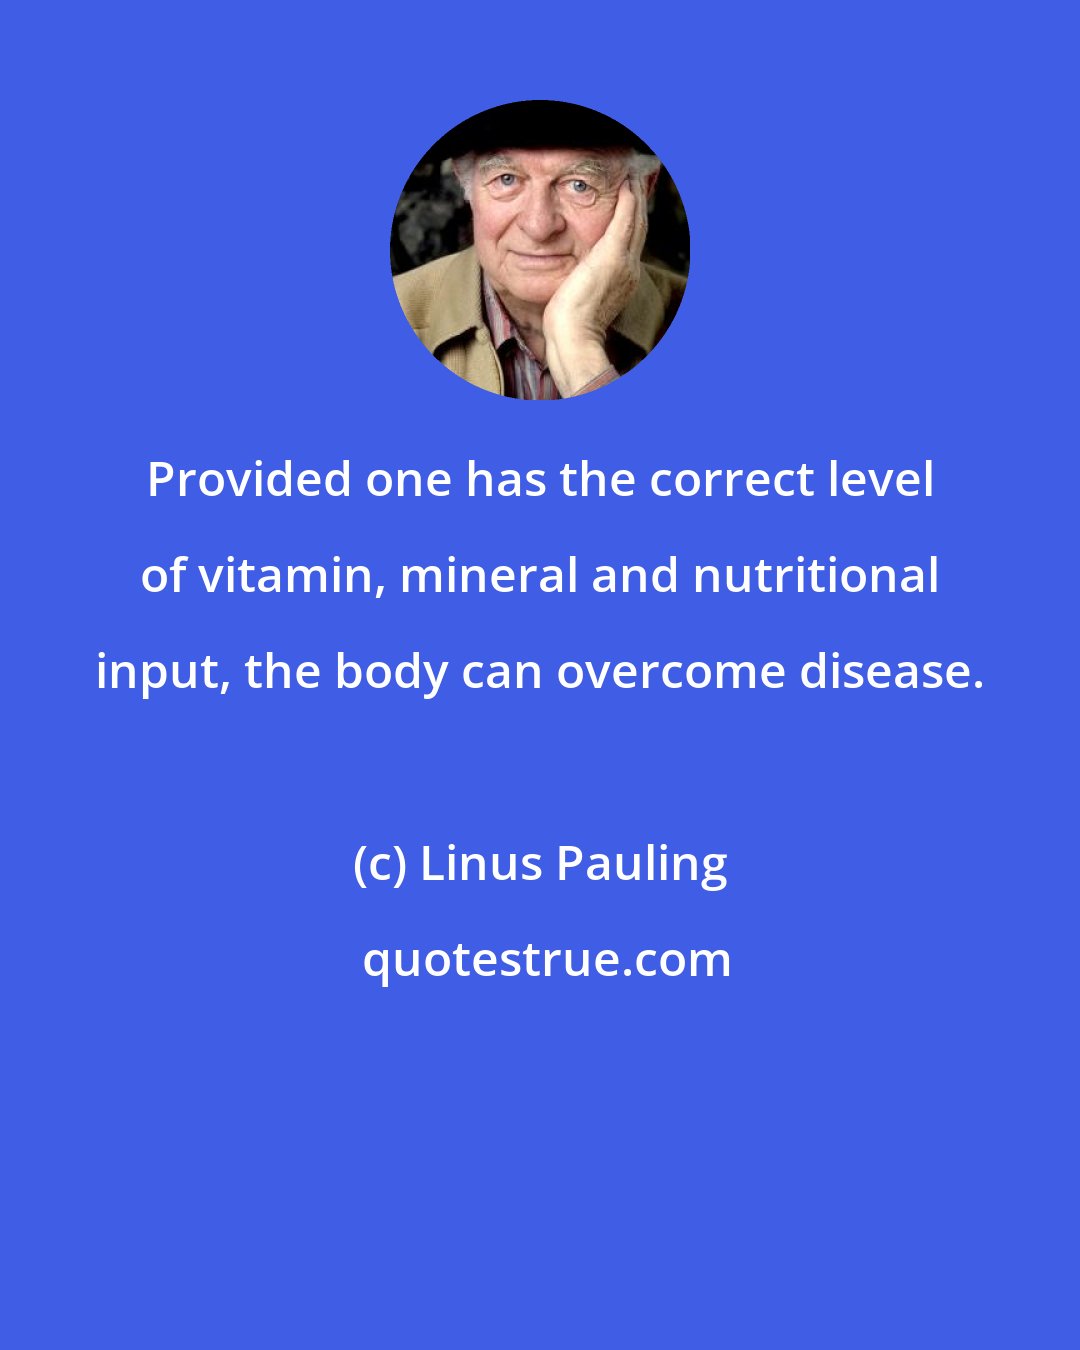 Linus Pauling: Provided one has the correct level of vitamin, mineral and nutritional input, the body can overcome disease.